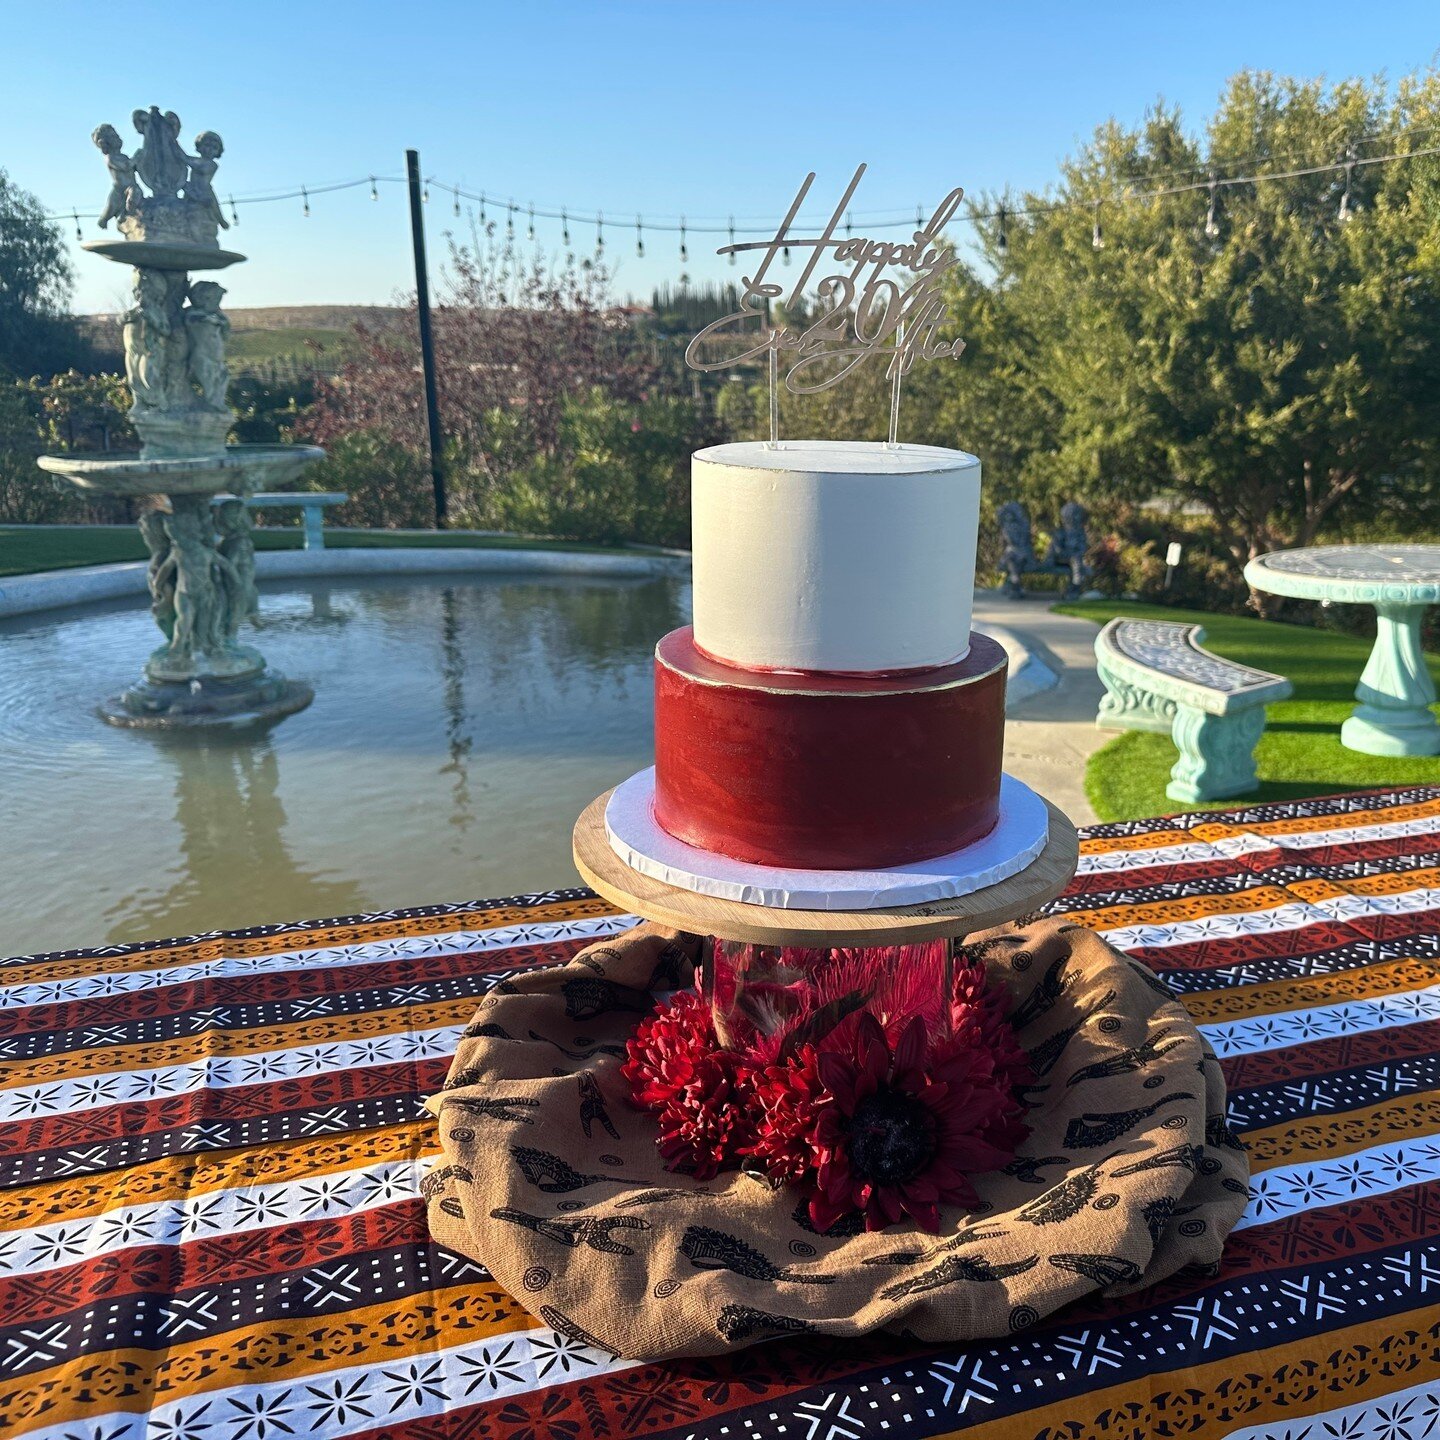 Beautifully Burgundy wedding cake⁠
⁠
⁠
Have an upcoming wedding? Call us at⁠
(951) 699-2399 for a wedding consultation⁠
or visit our website at www.1914bakery.com for more info!⁠
⁠
#dessert #cakedesigner #flowers #temeculawine #chocolate #food #custo